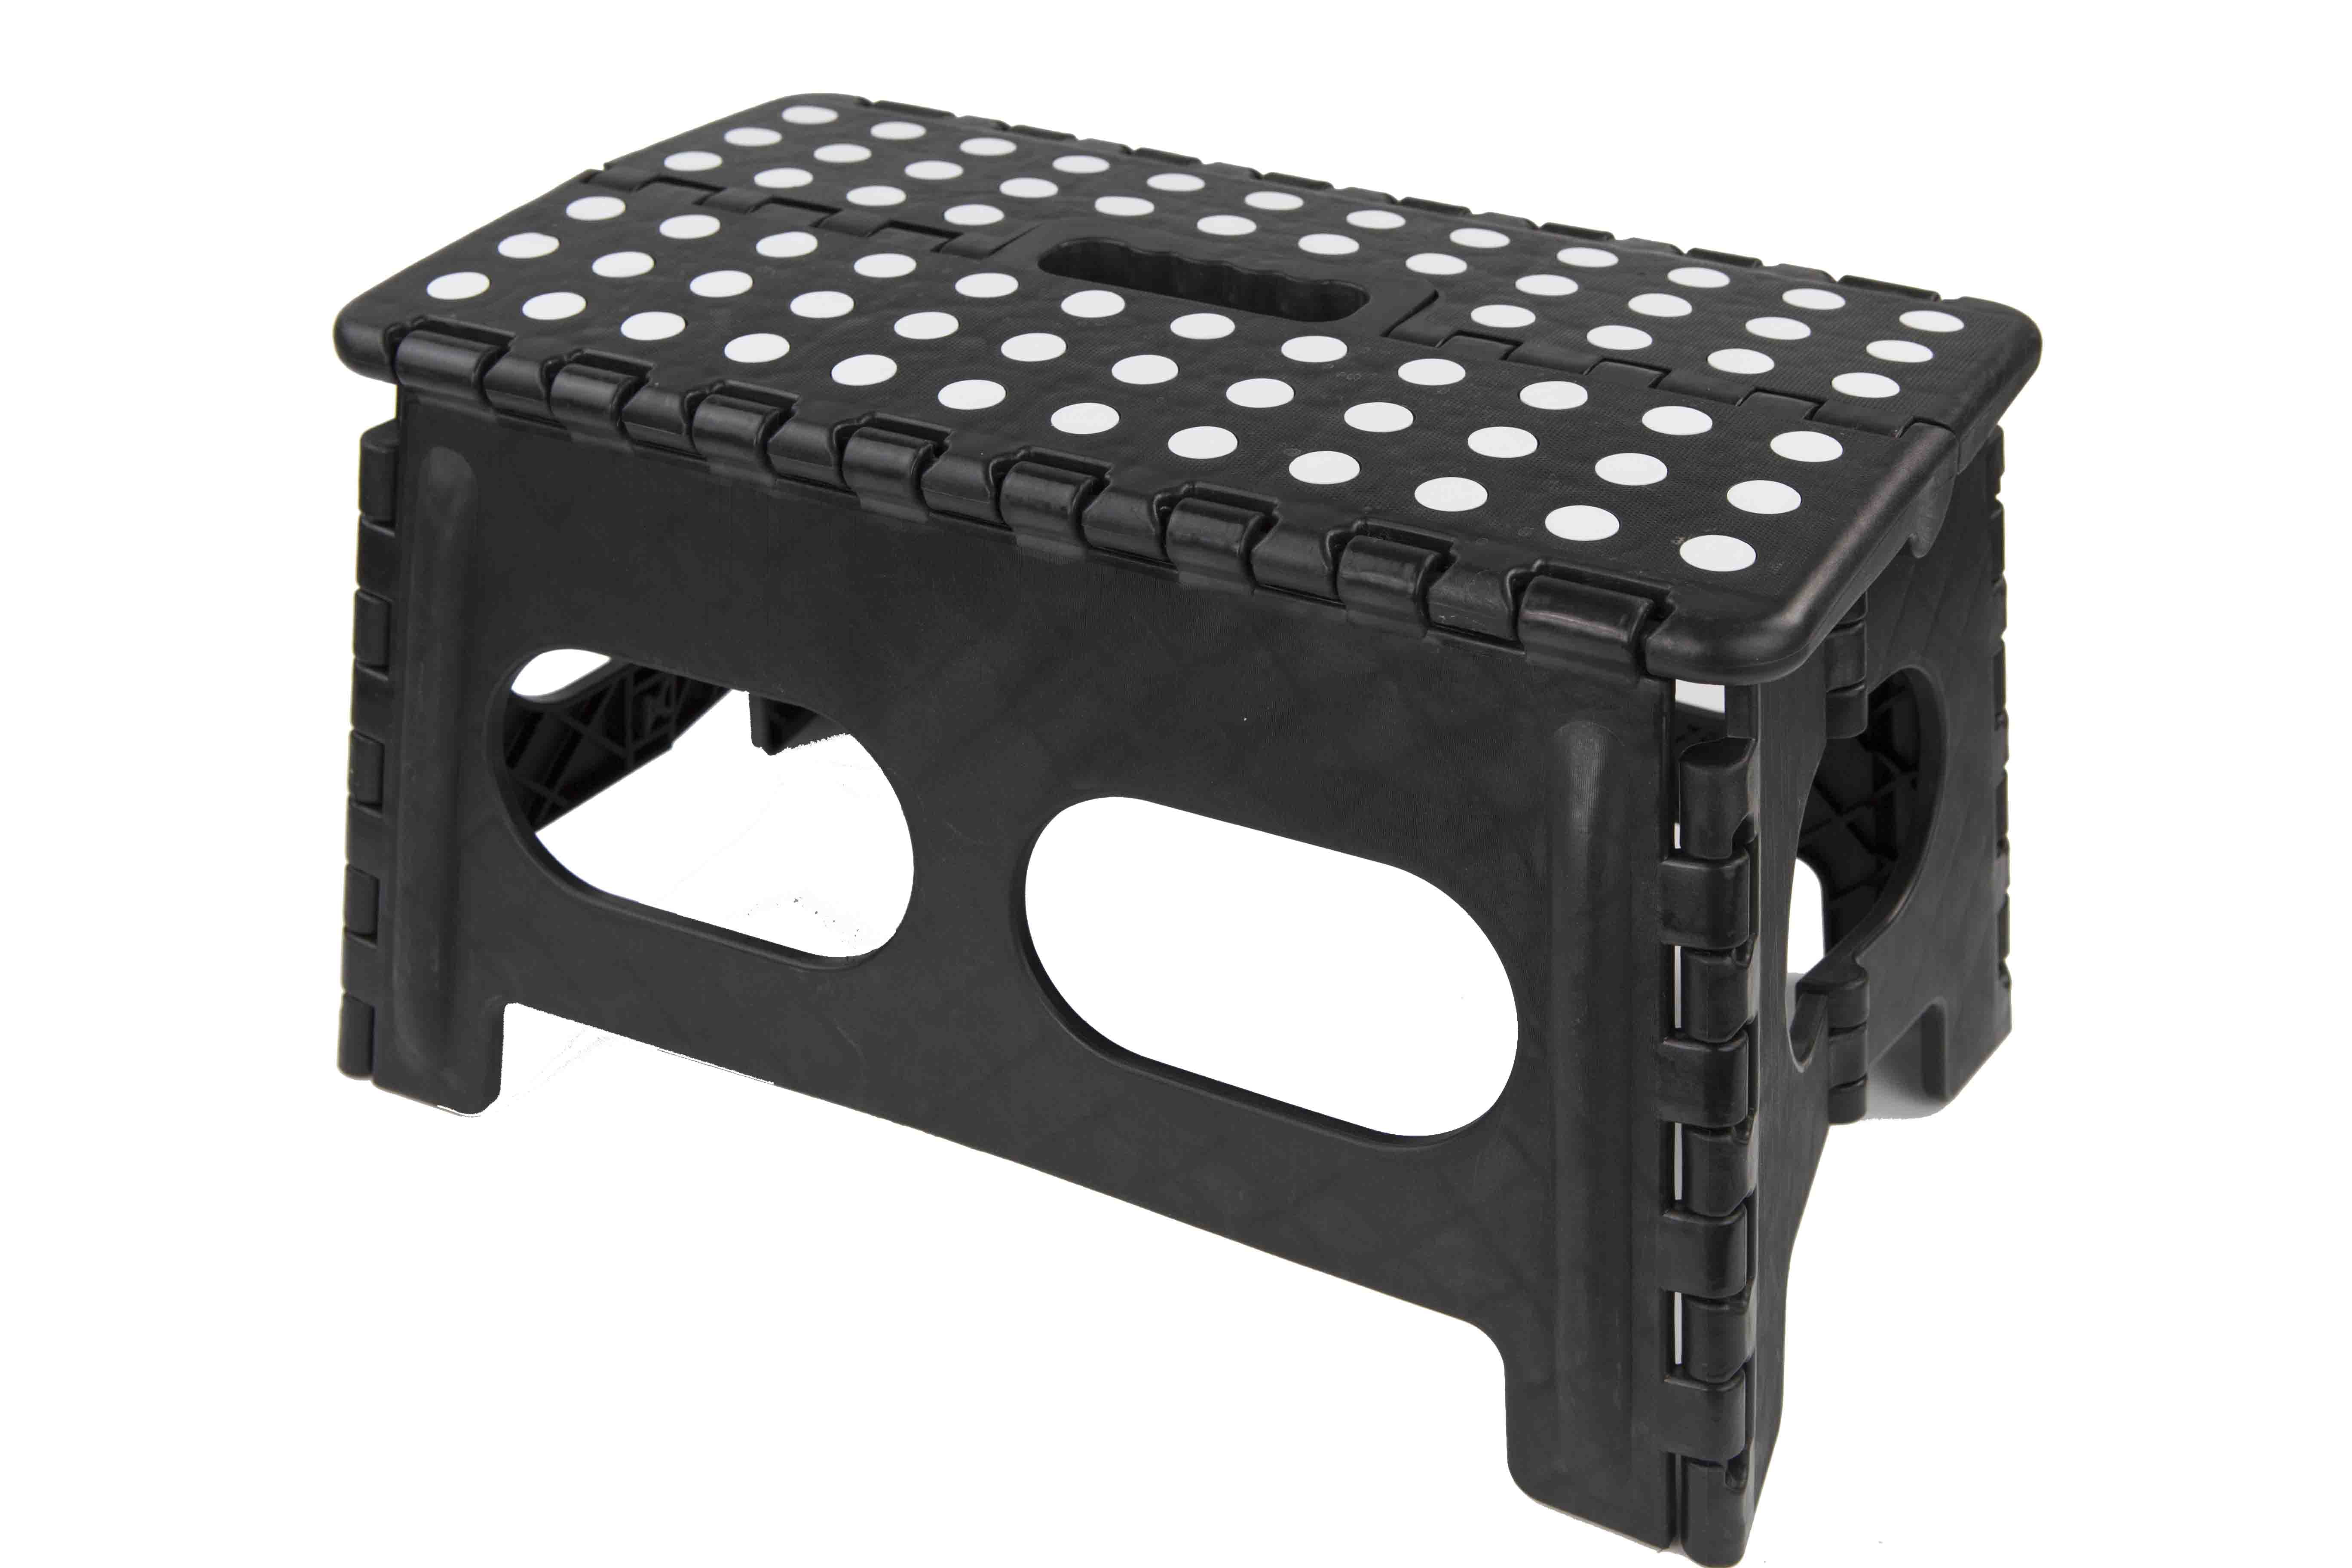 Folding Step Stool with Non Slip Dots Carrying Handle 